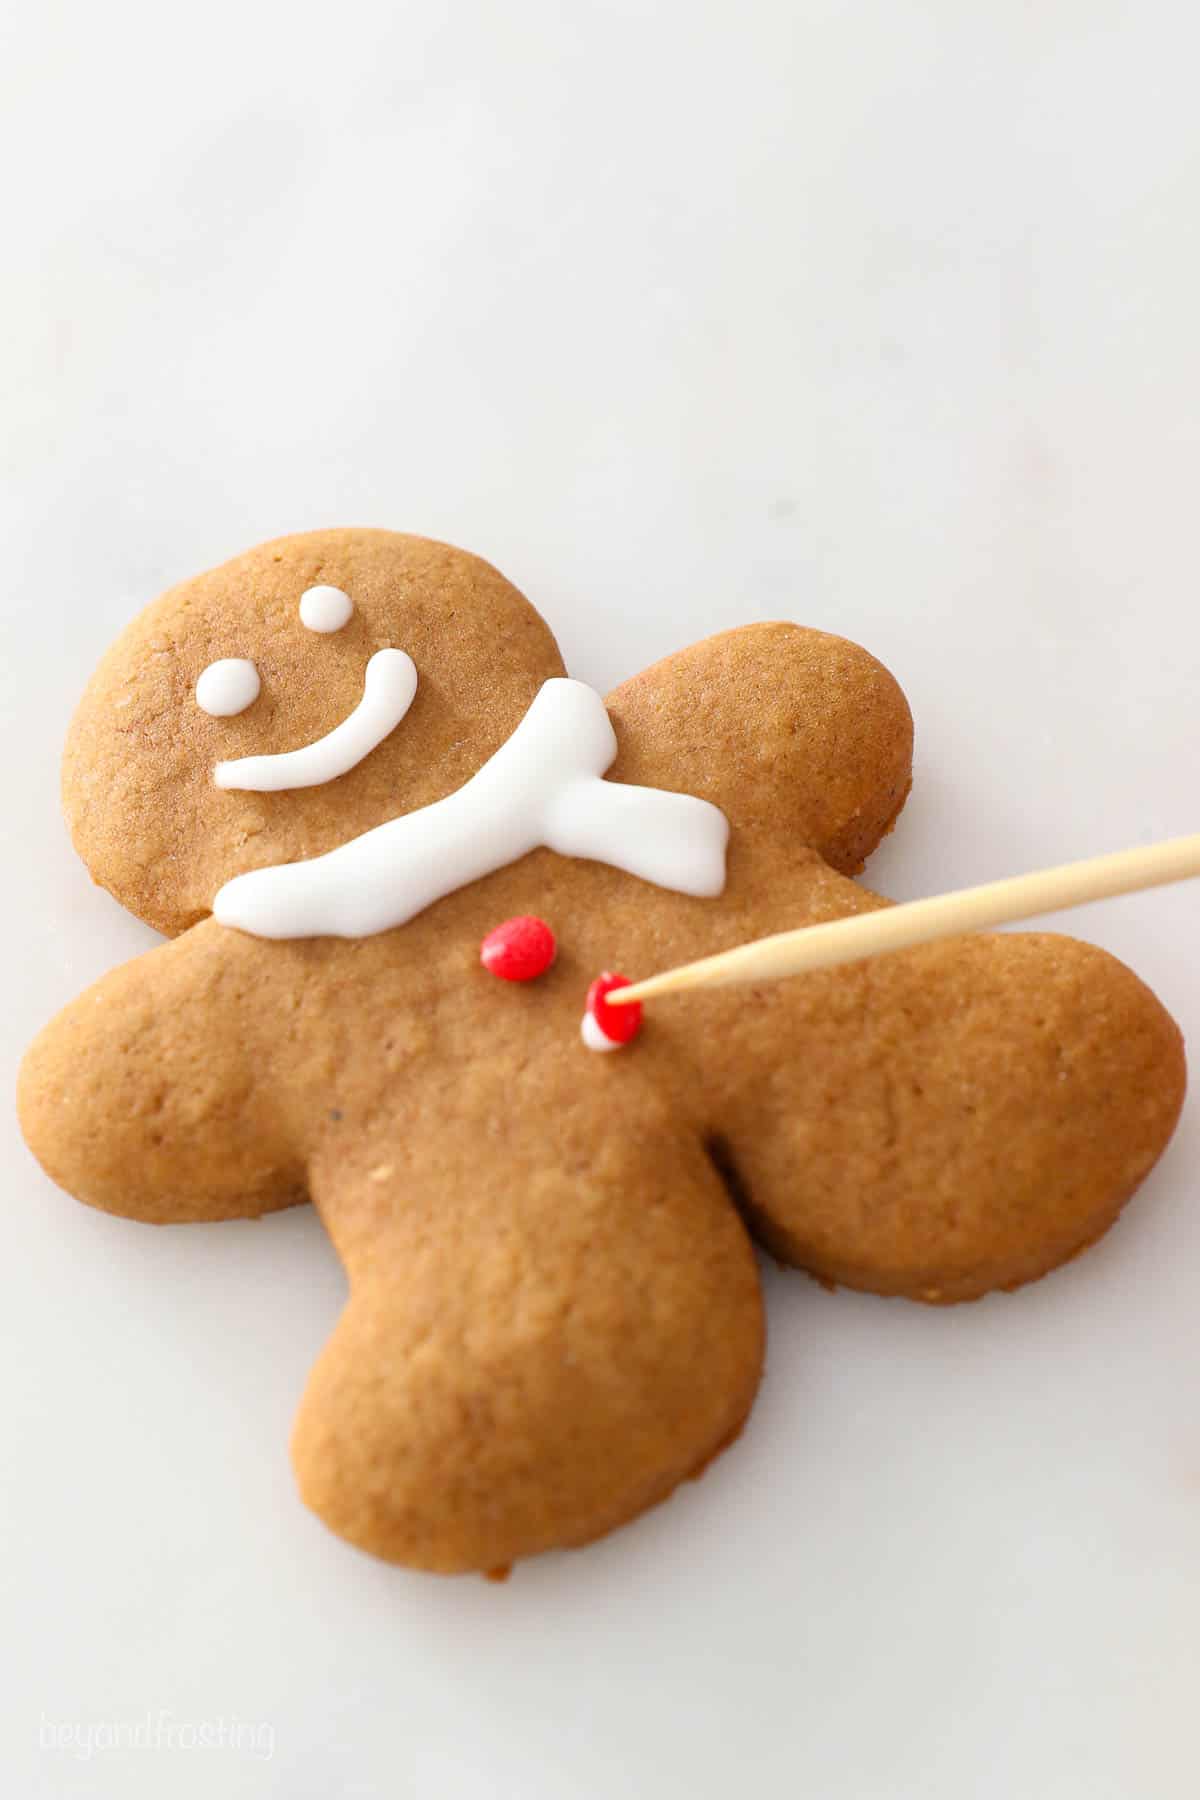 A red sprinkle being added to a soft gingerbread man cookie on top of a dot of icing